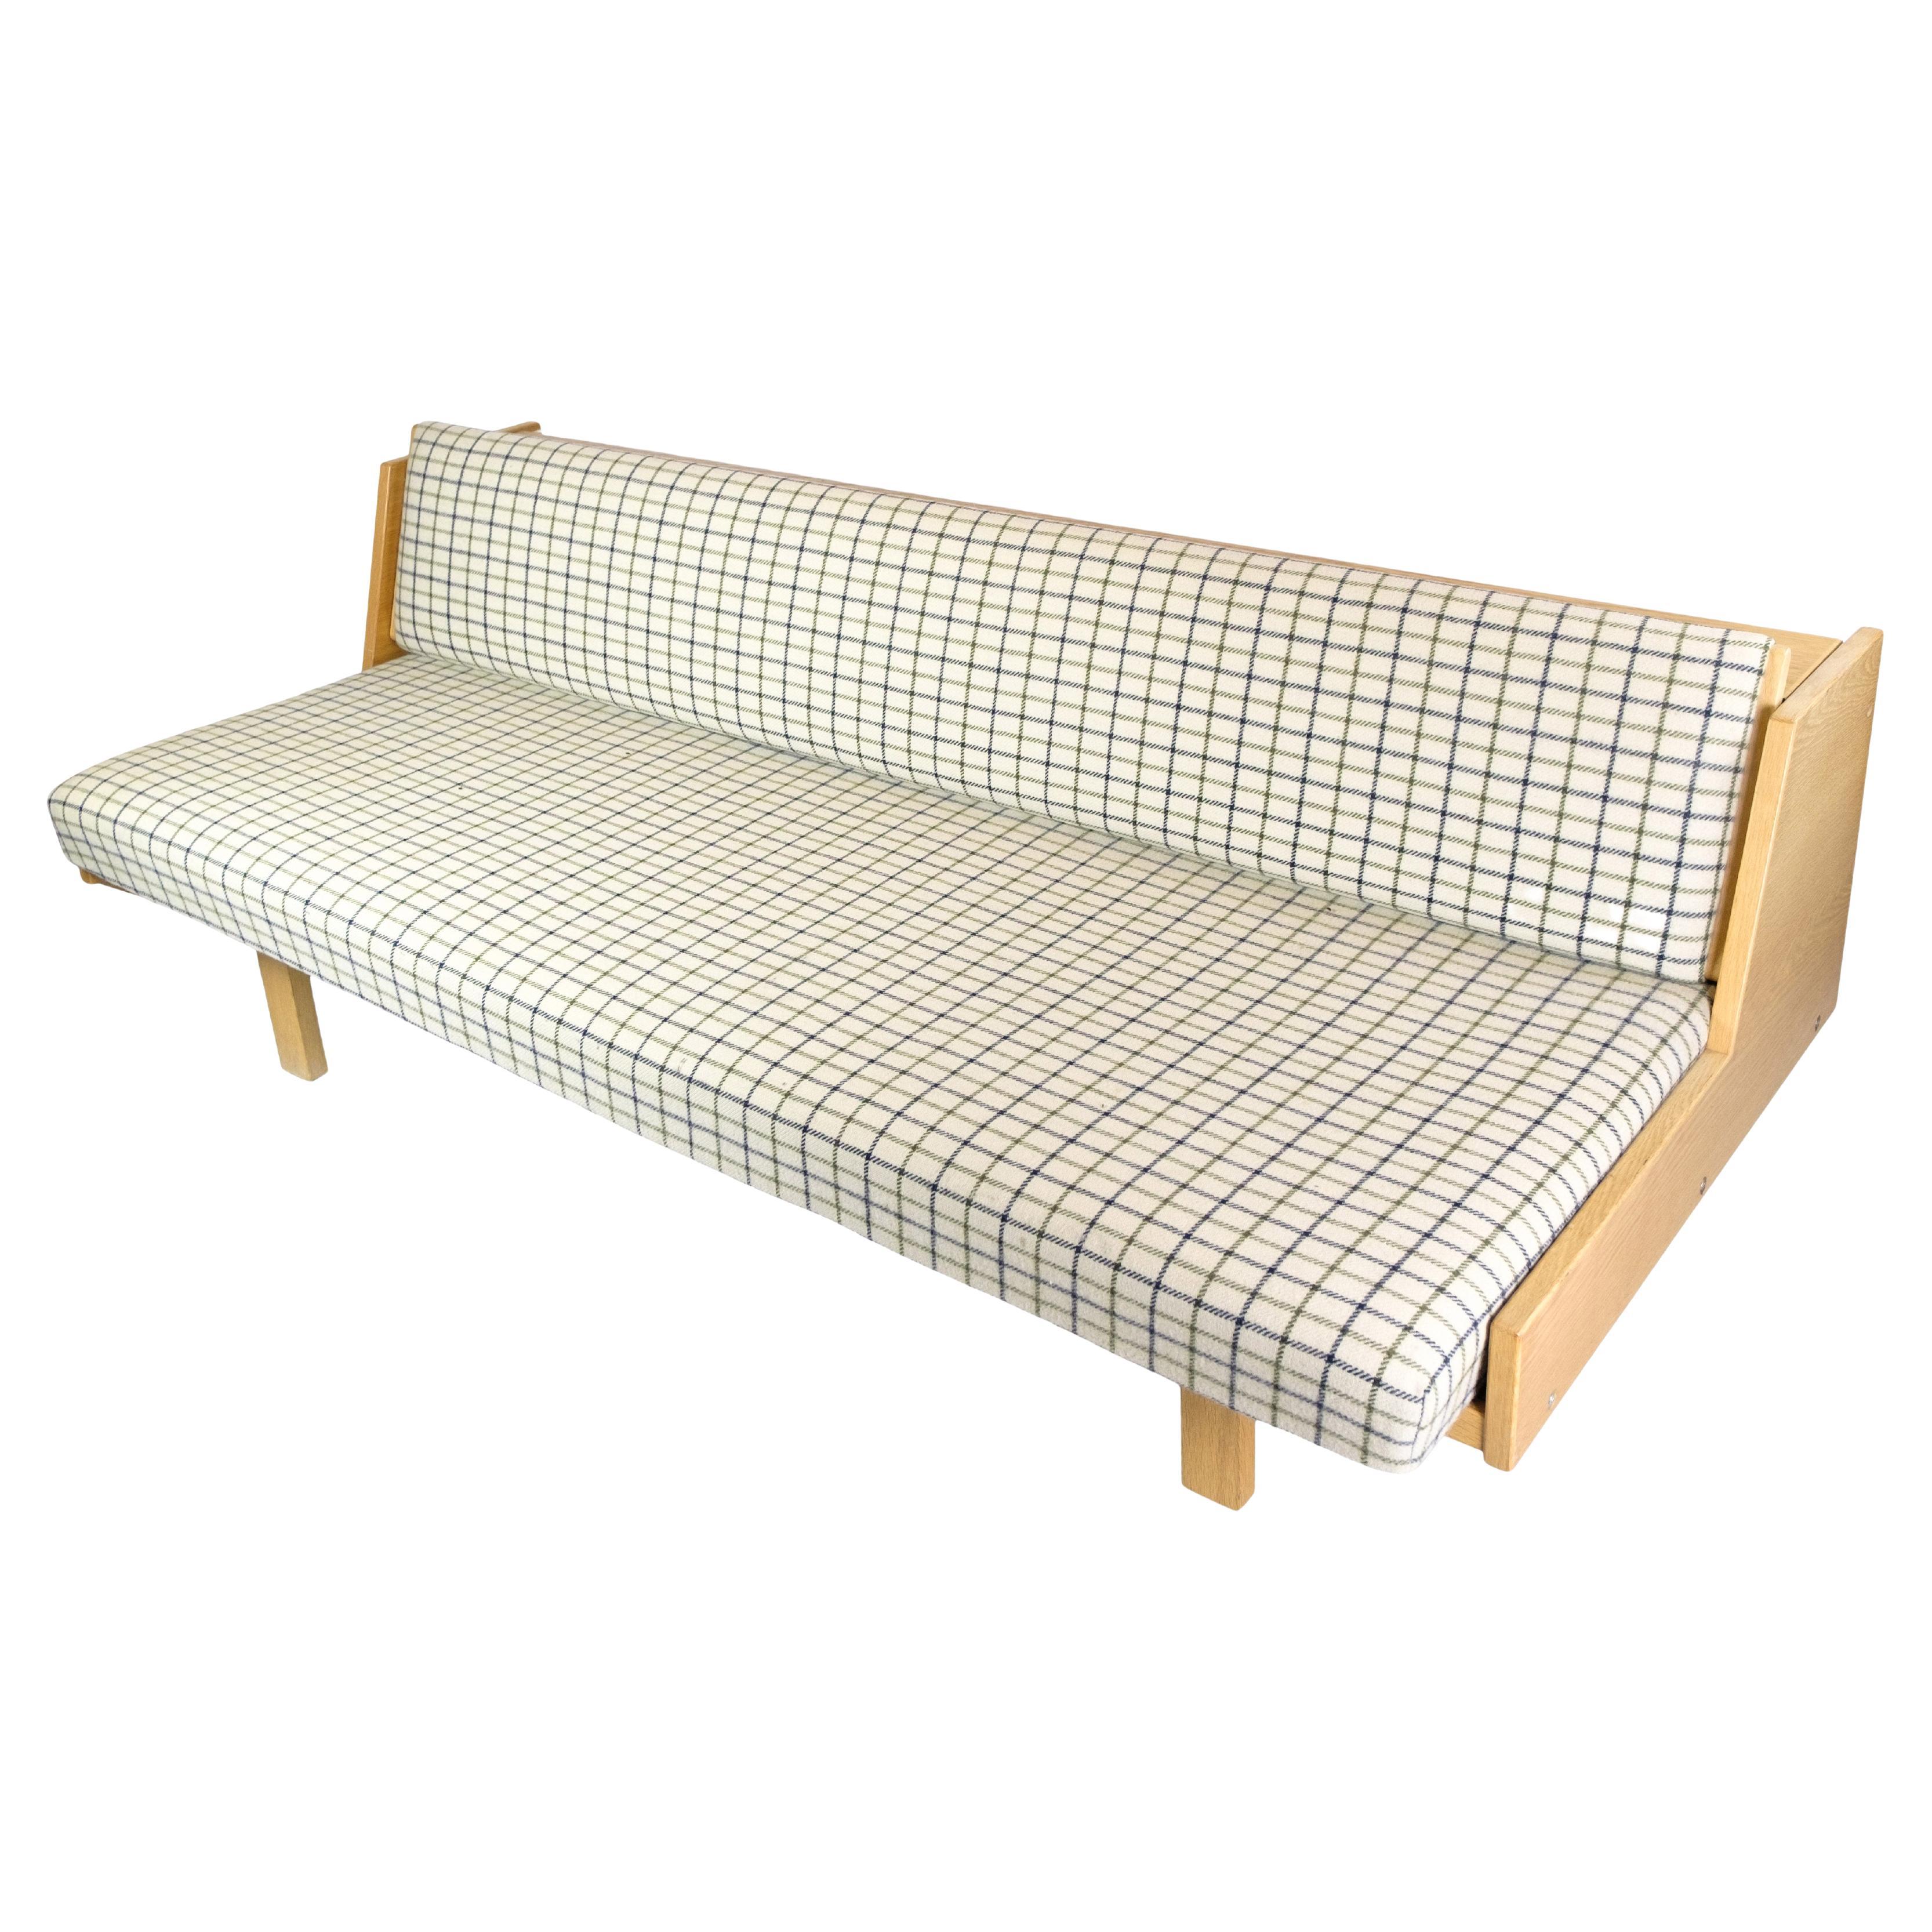 Daybed/Sofa Made In Oak Designed by Hans J. Wegner From 1960s